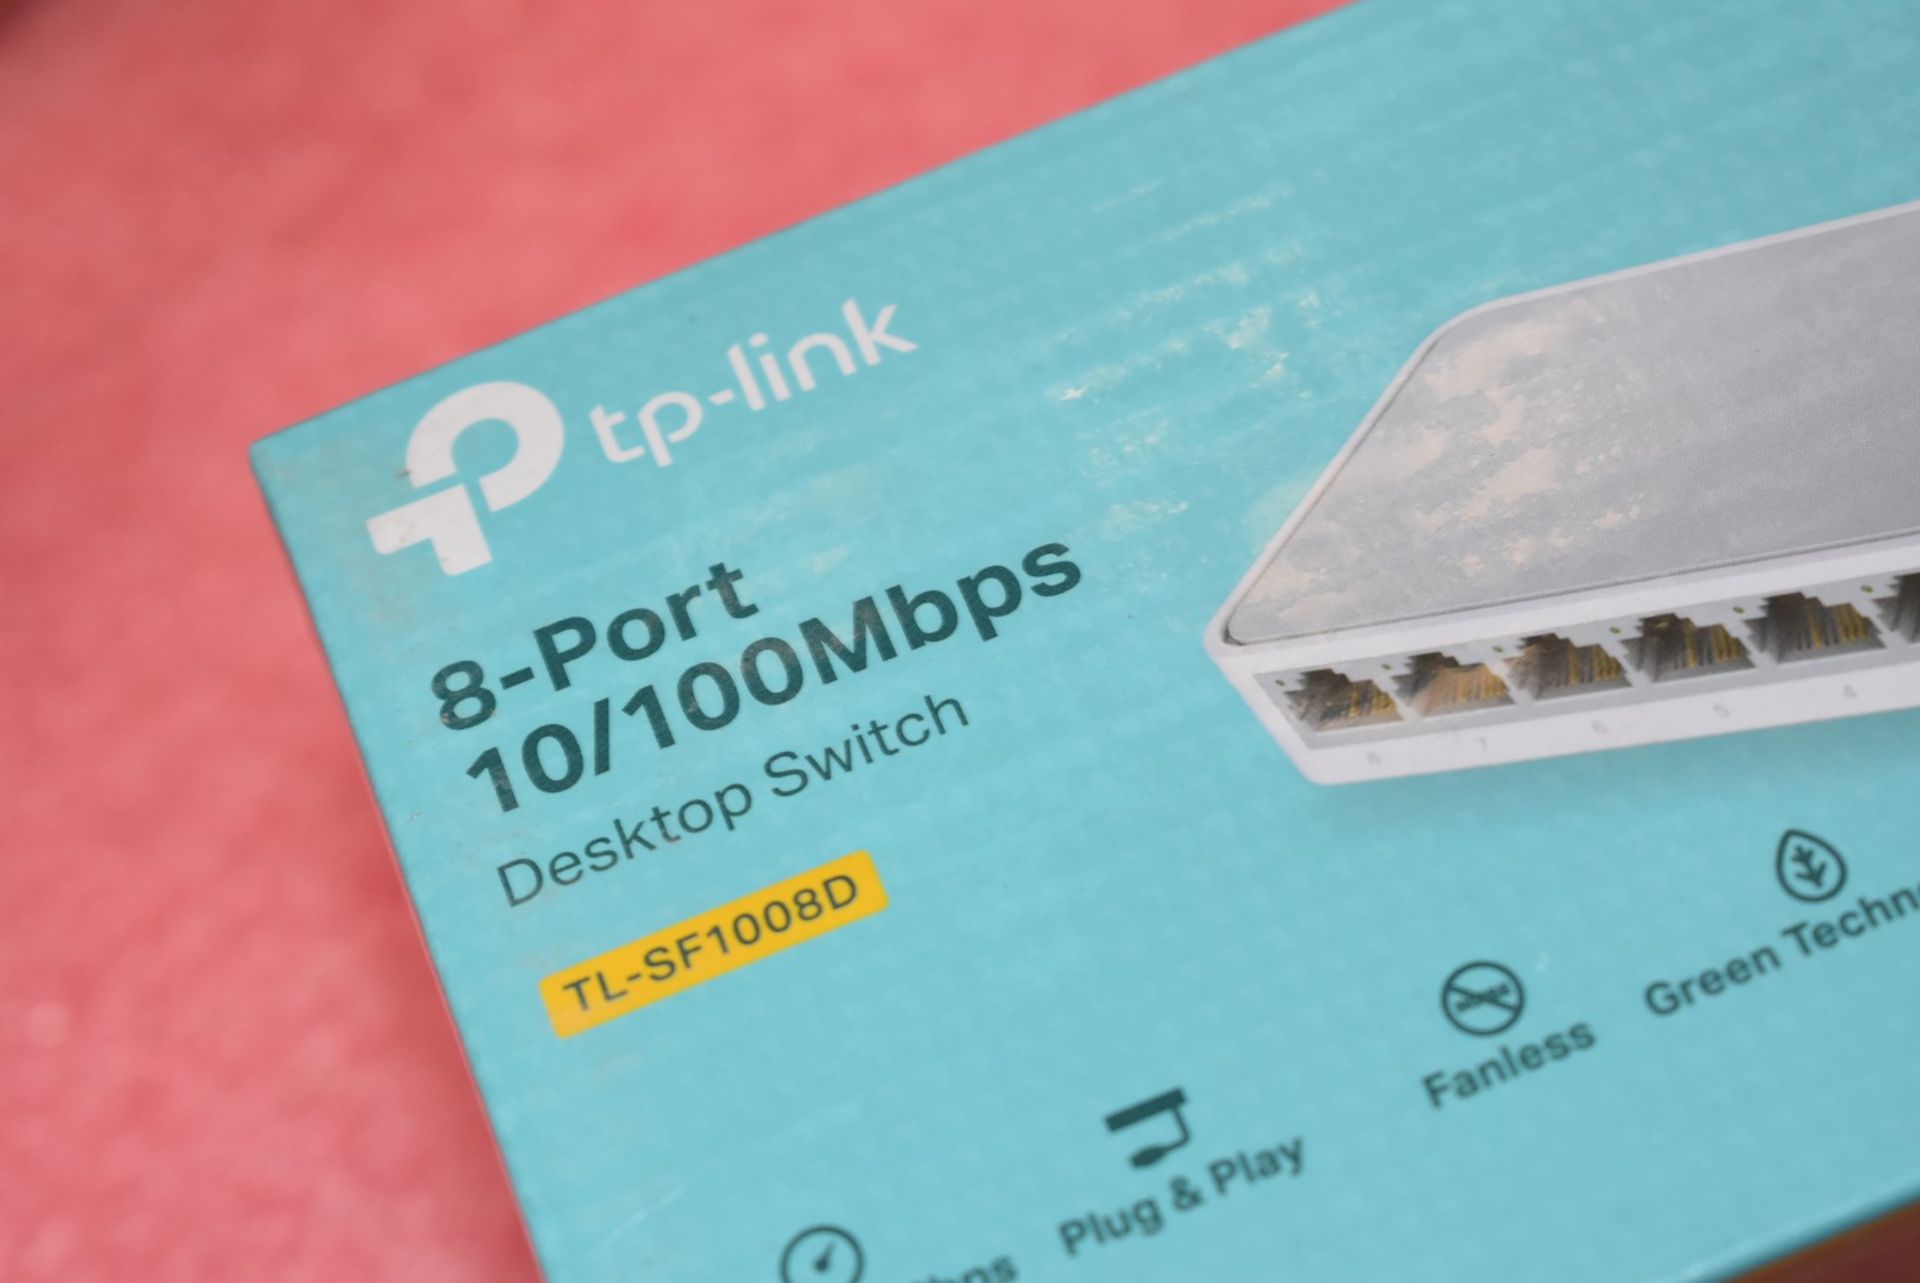 3 x TP Link 8 Port 10/100Mbos Desktop Switches - Model TL-SF1008D - New Sealed Stock - Image 2 of 6